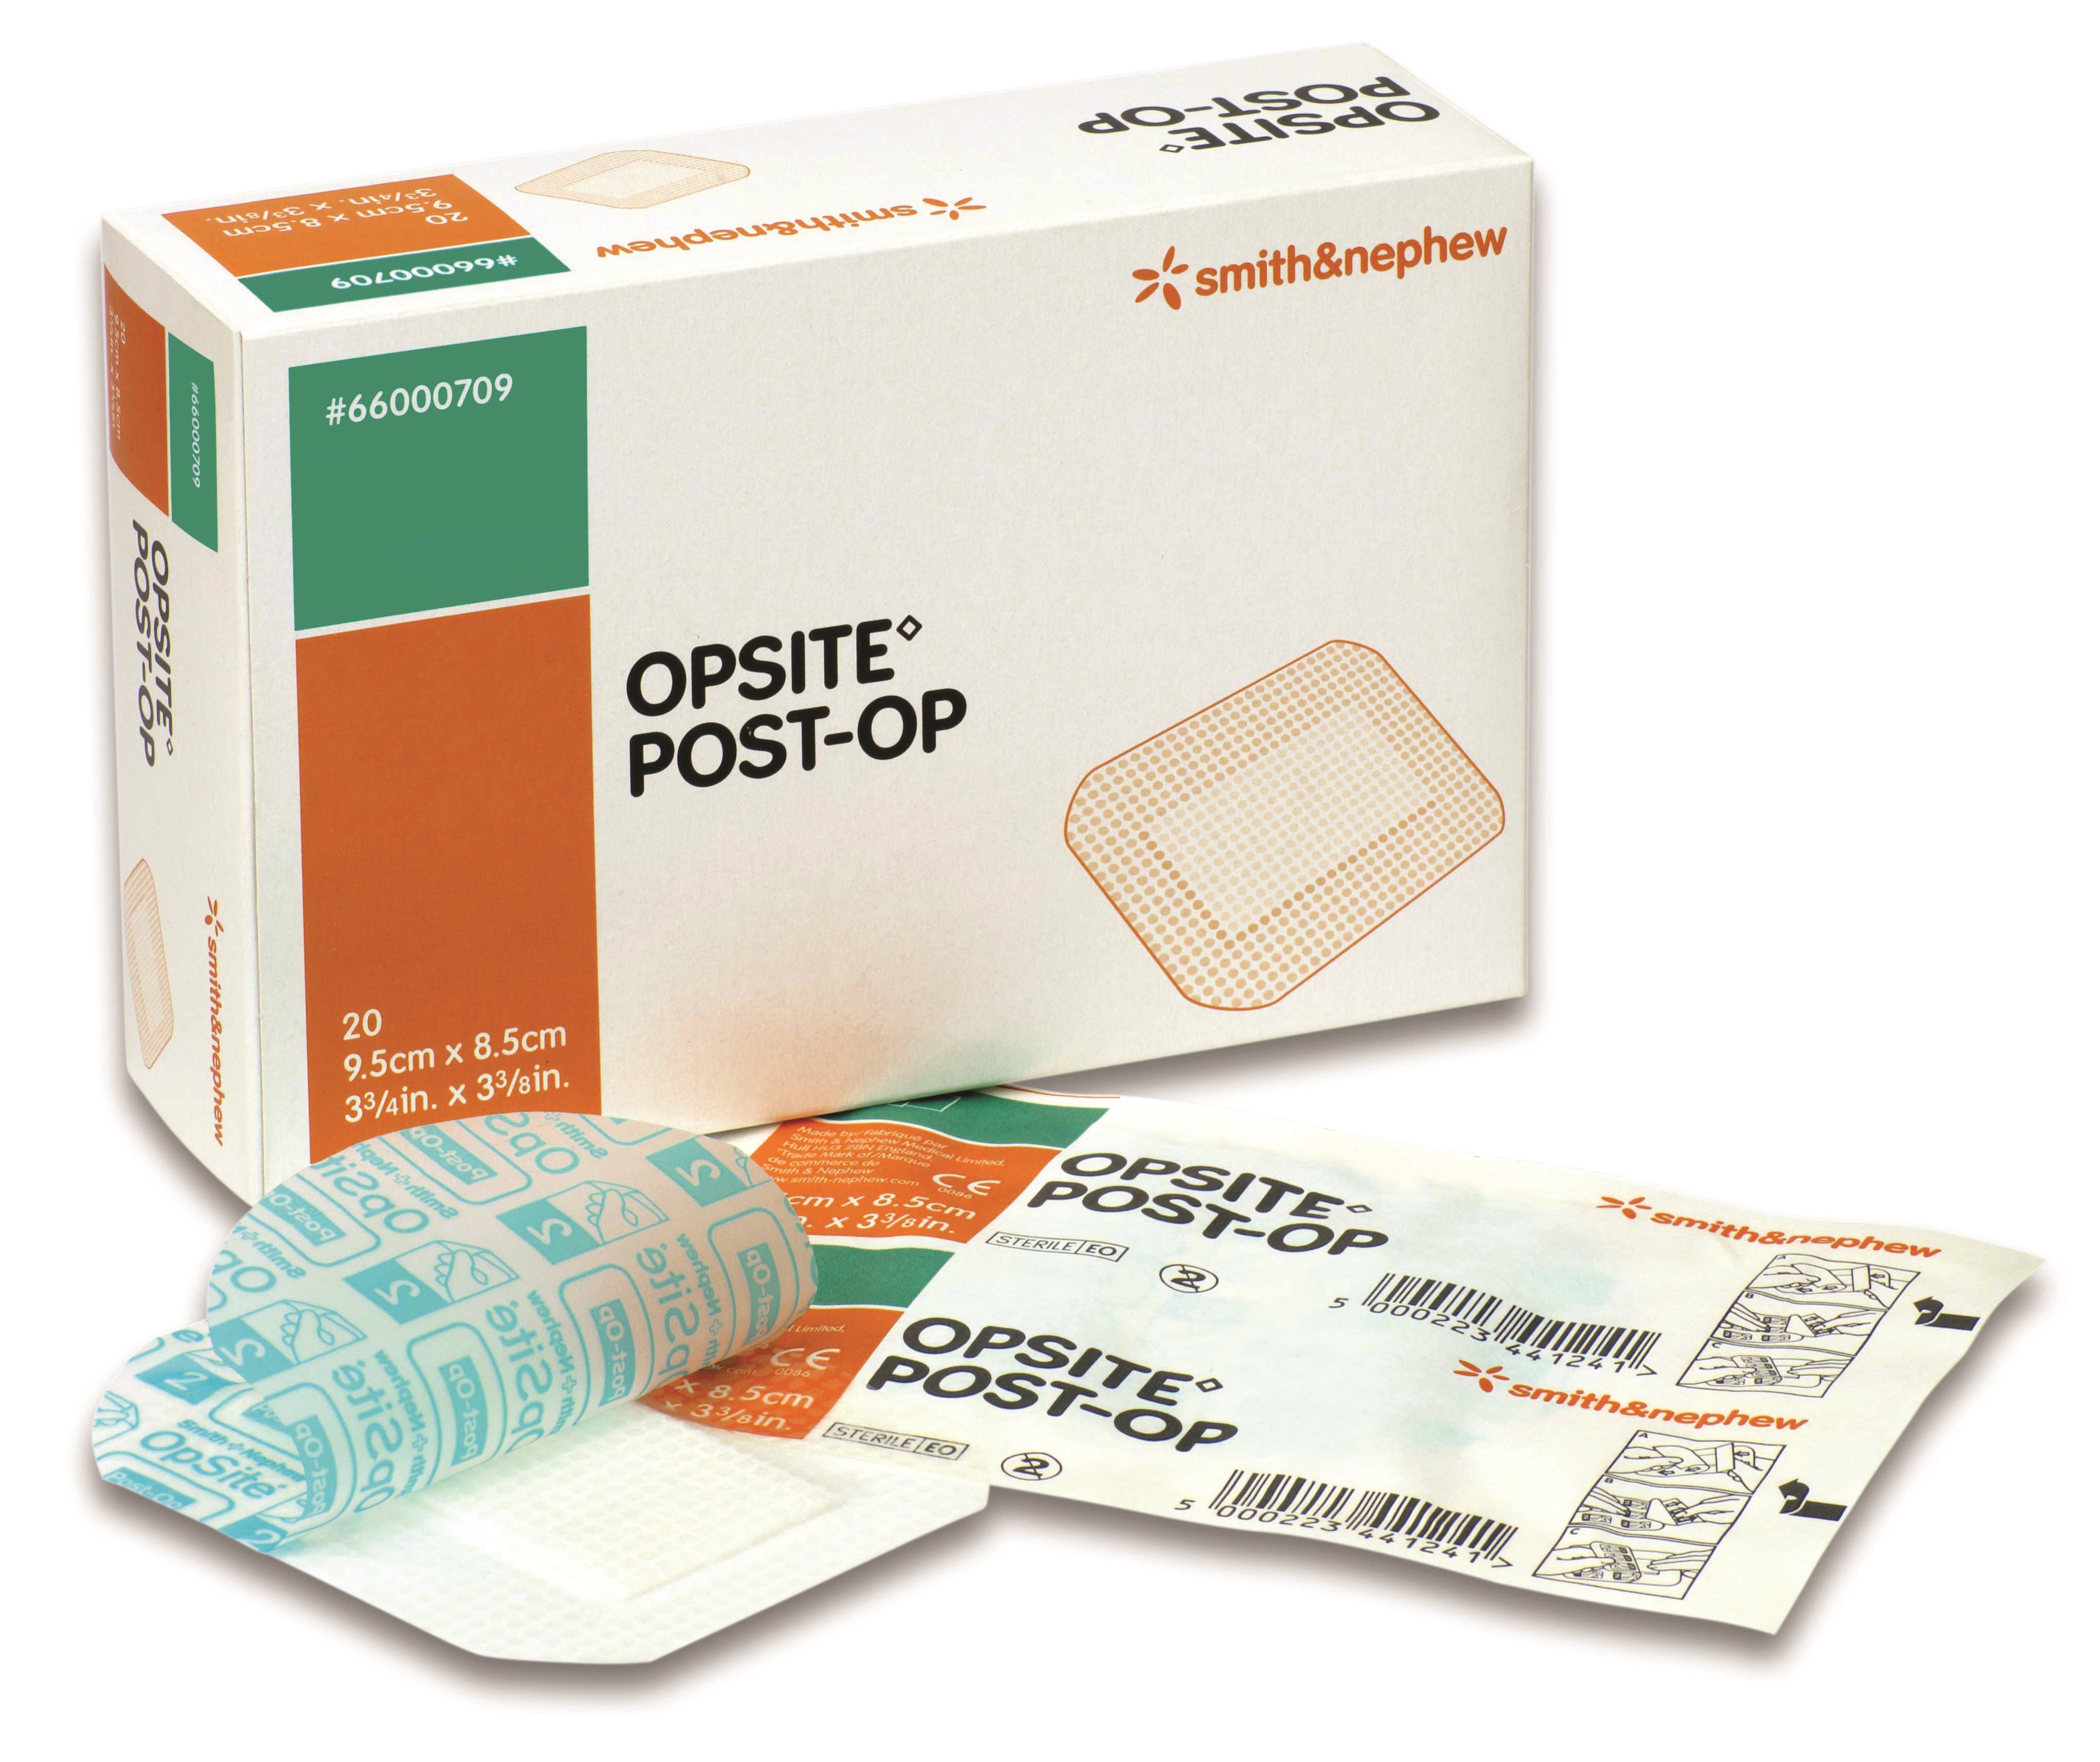 Opsite Post-Op Wound Dressing 9.5cm x 8.5cm